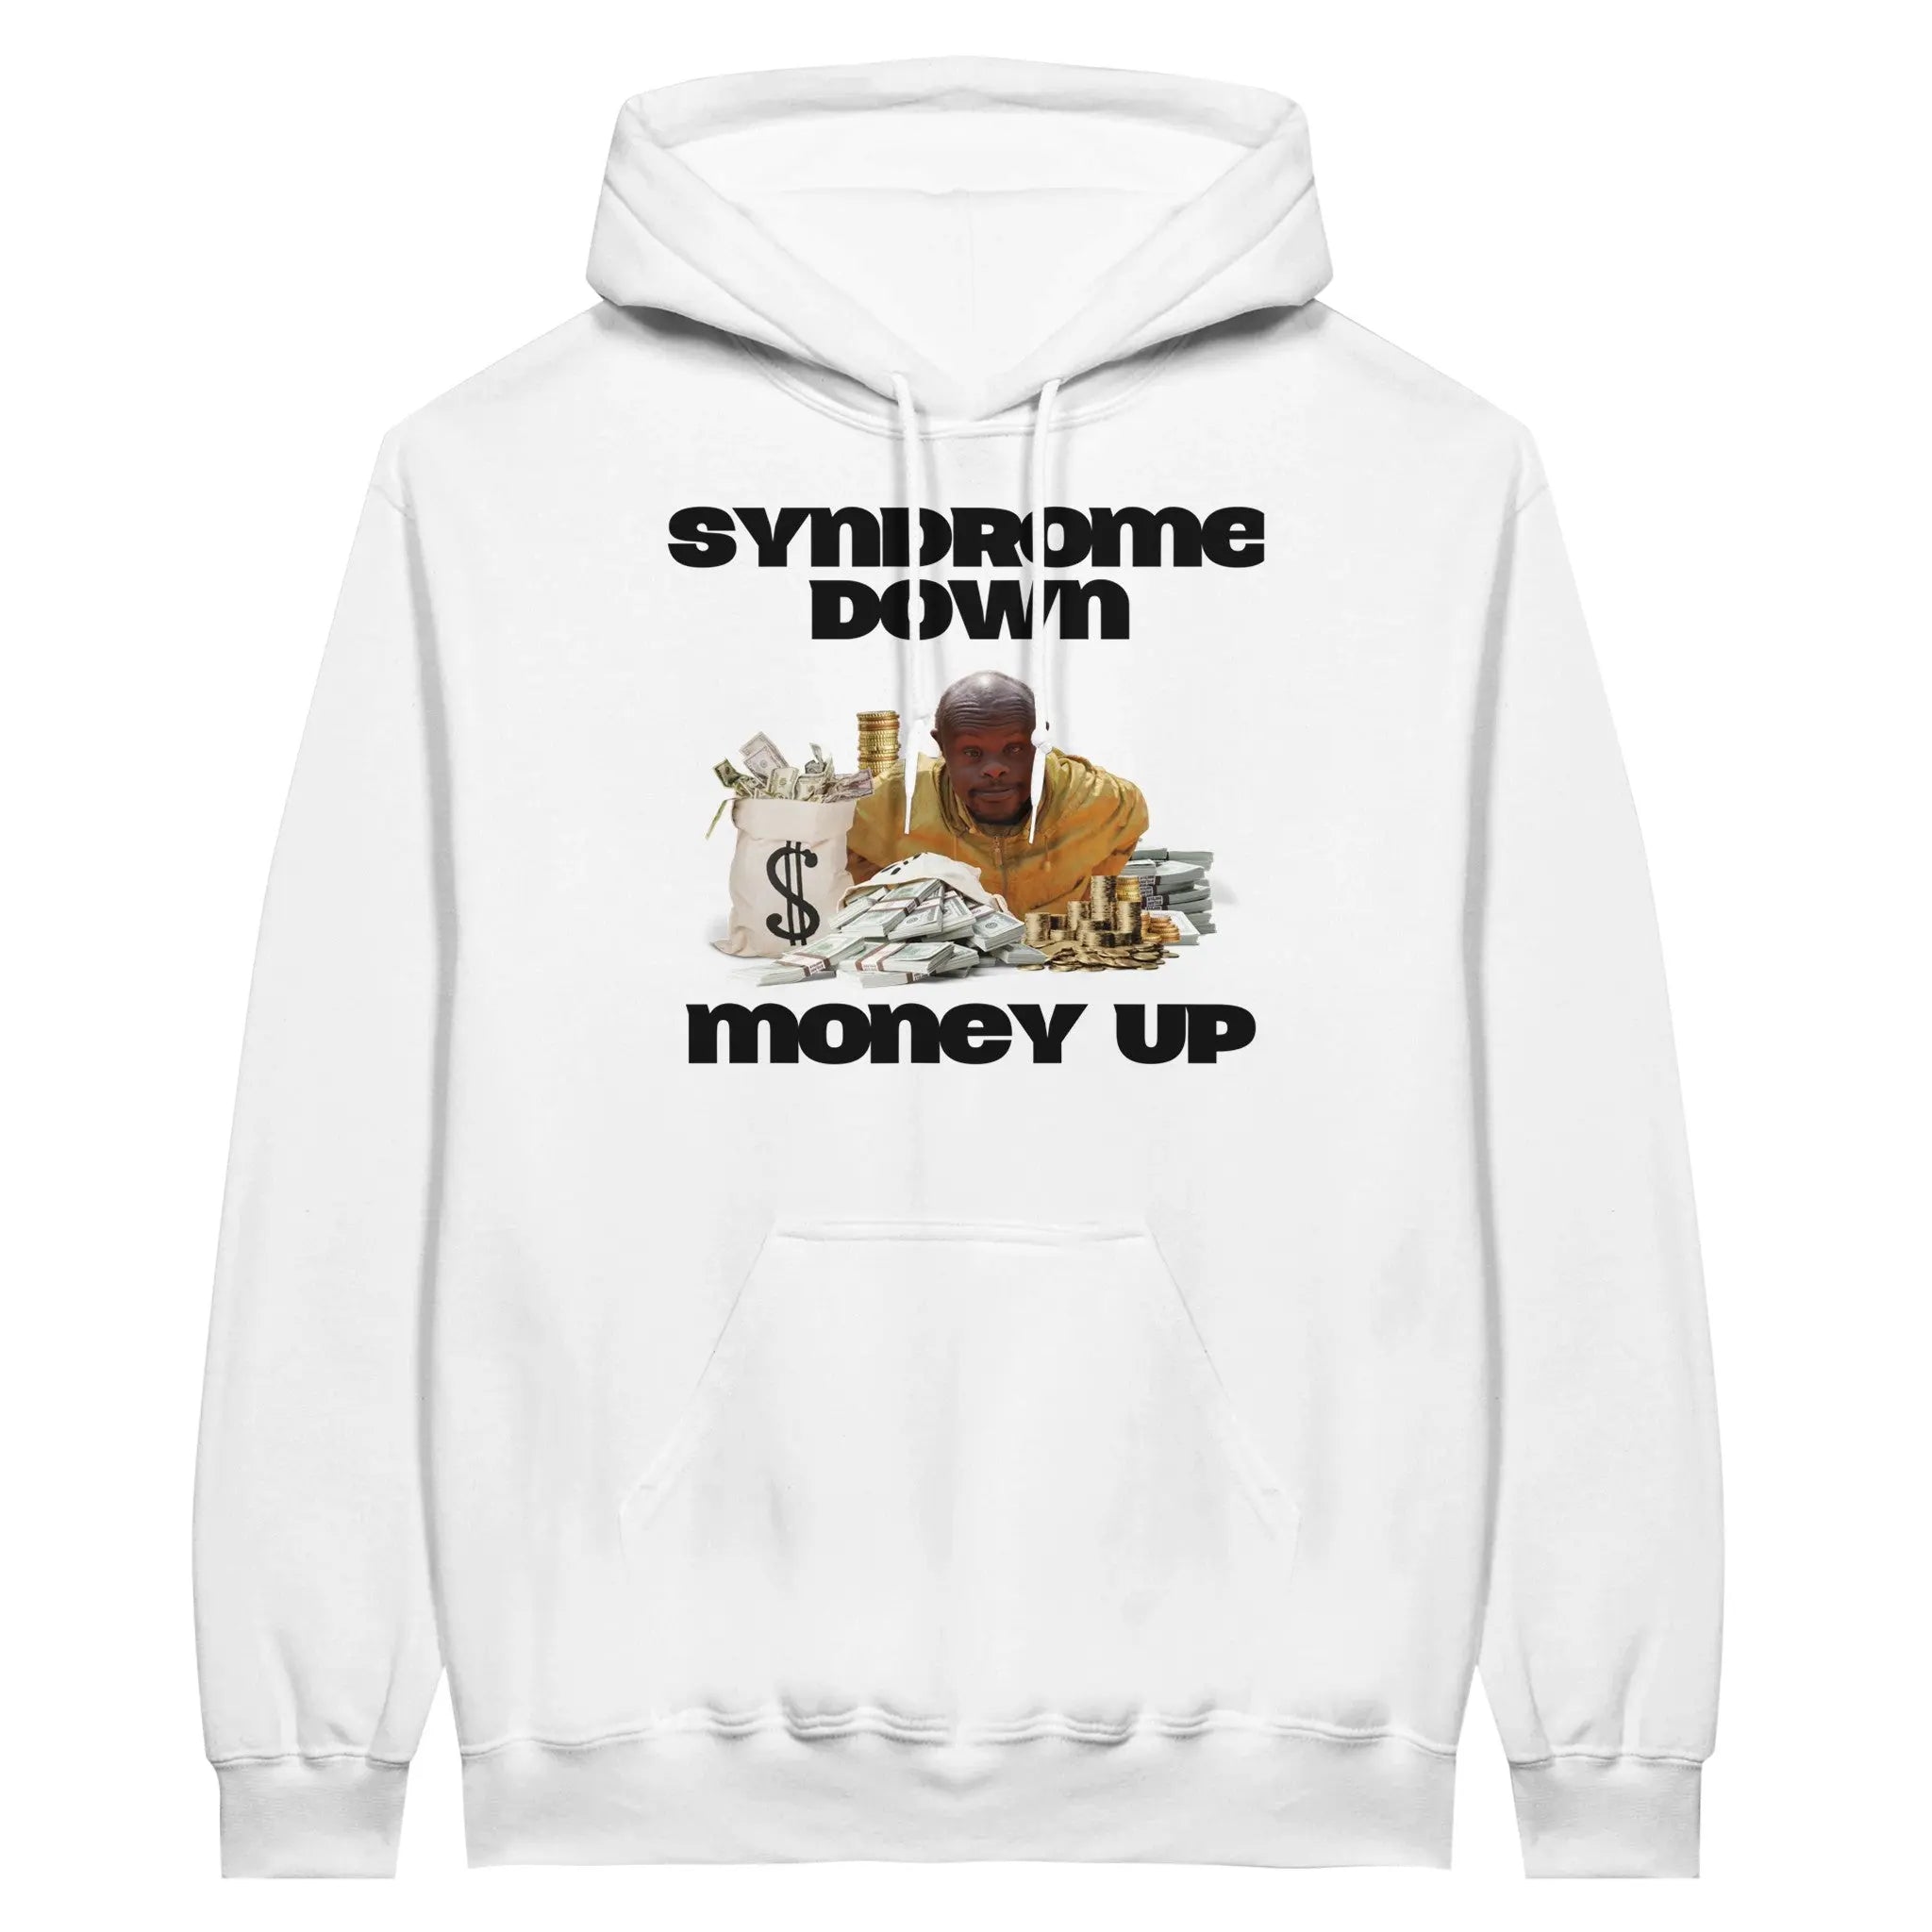 Syndrom down money up Hoodie